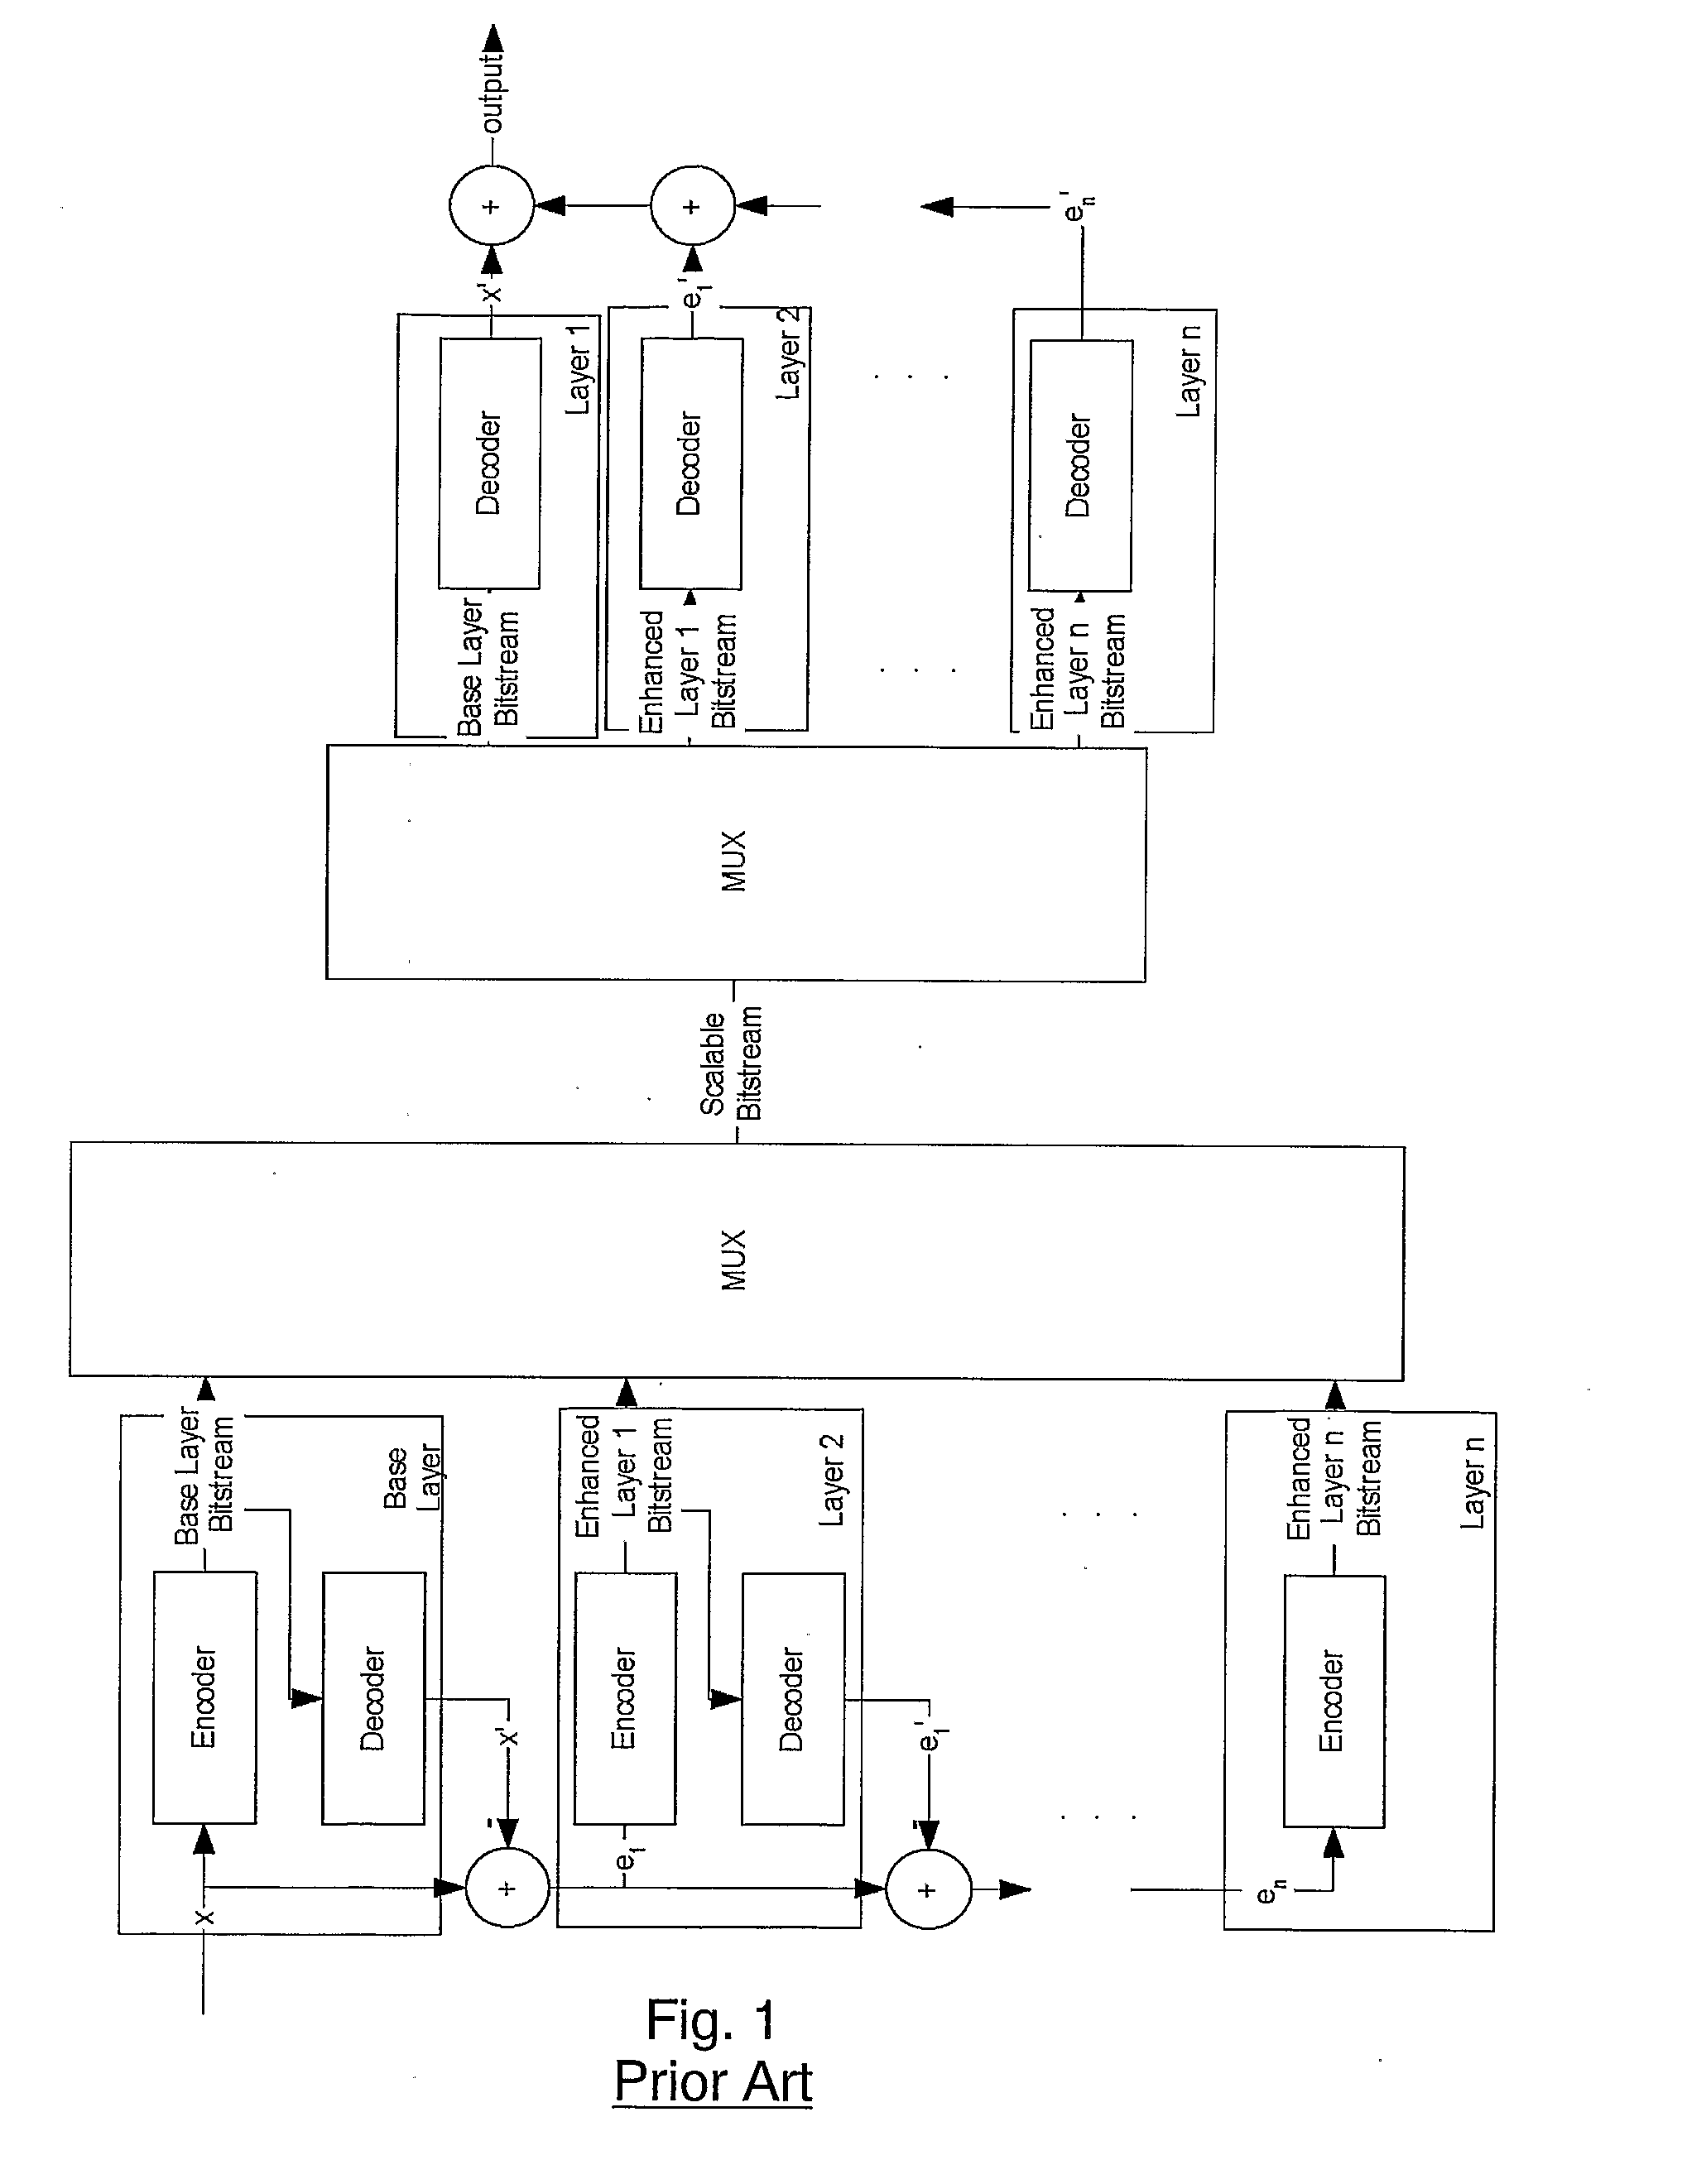 Systems and Methods For Scalably Encoding and Decoding Data